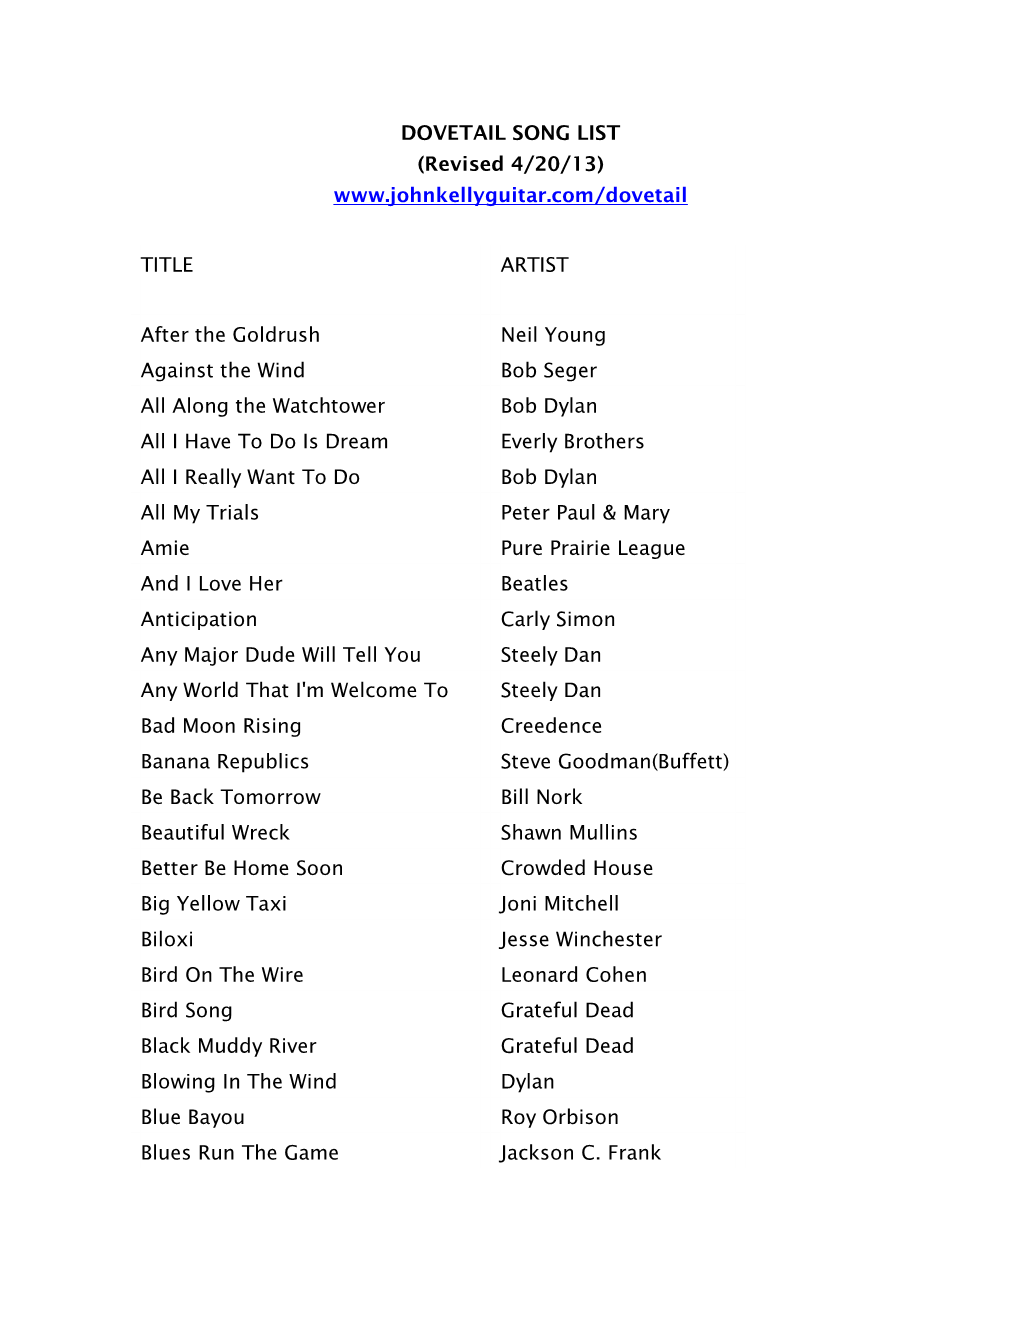 DOVETAIL SONG LIST (Revised 4/20/13)